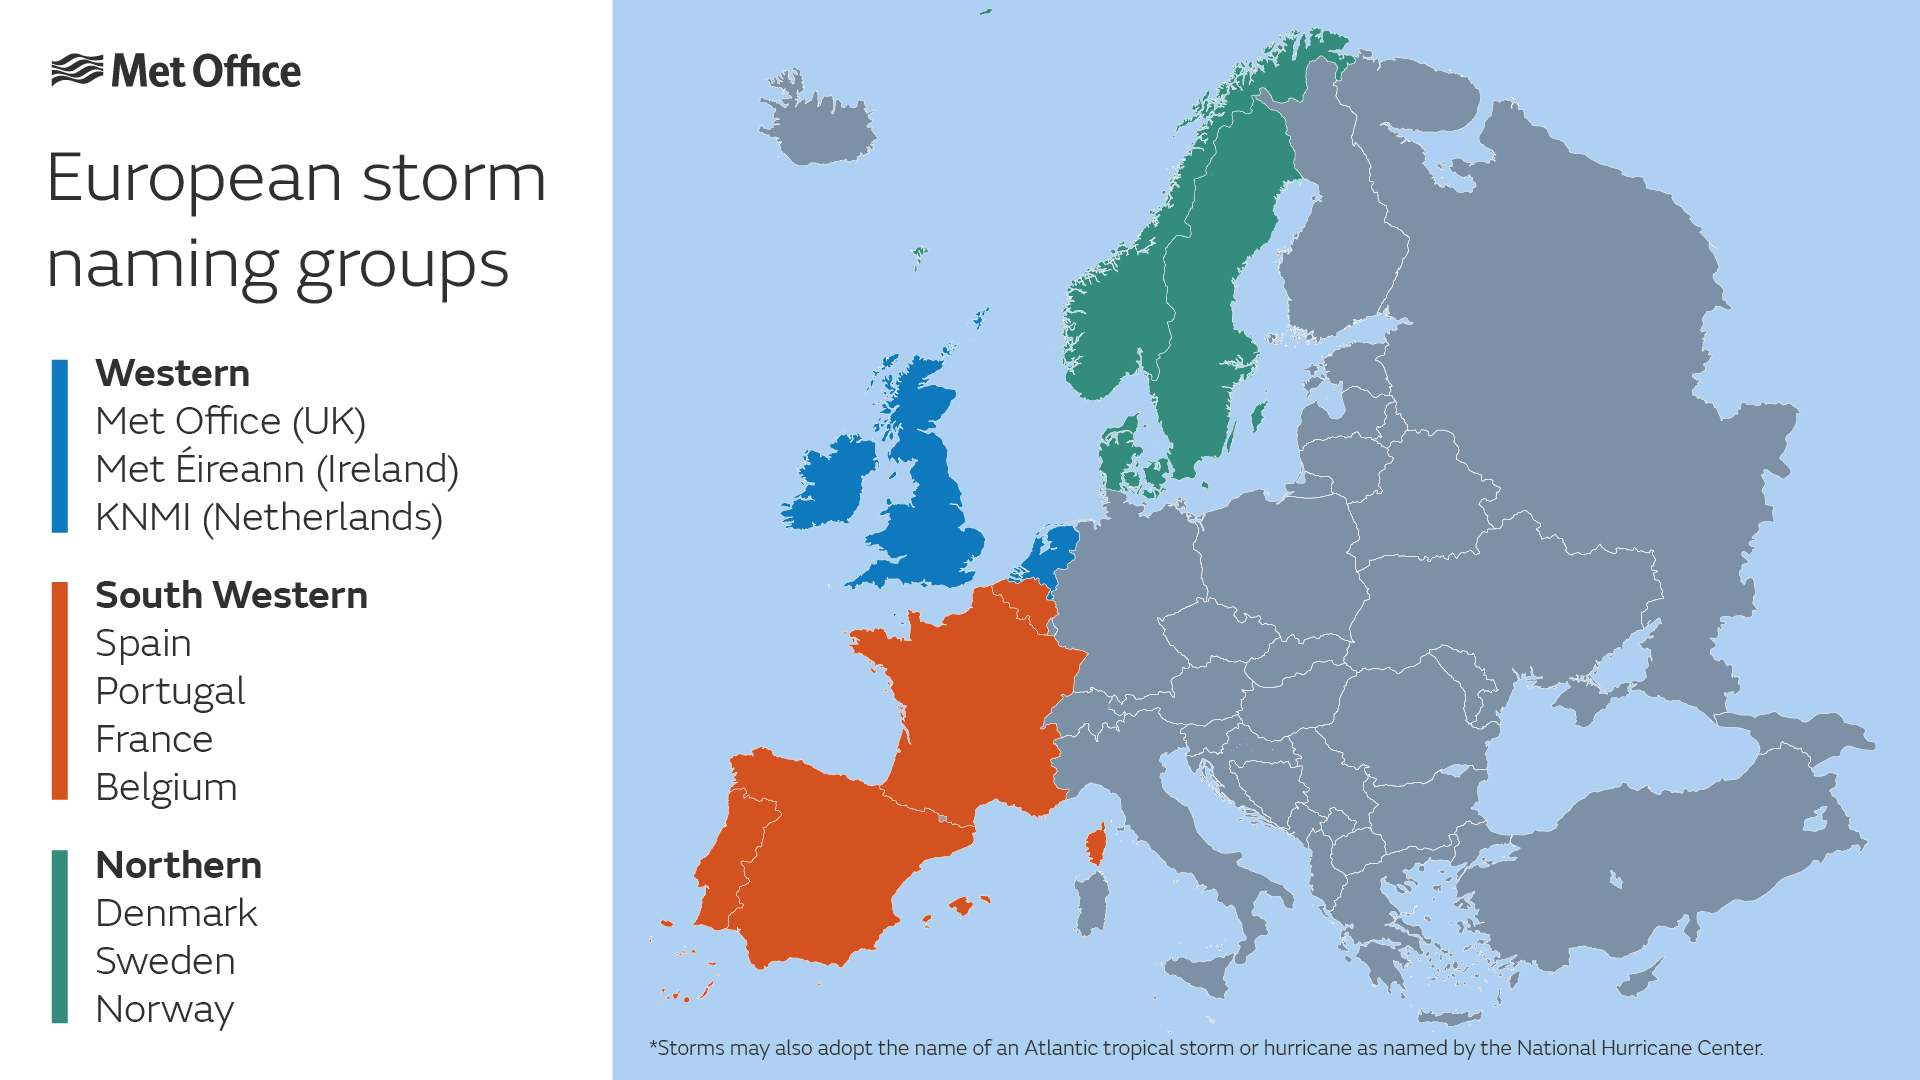 A map of the European storm naming groups. Denmark, Sweden and Norway are in the northern group. Spain, Portugal, France and Belgium are in the south western group and Ireland, the Netherlands and the UK are in the western group.